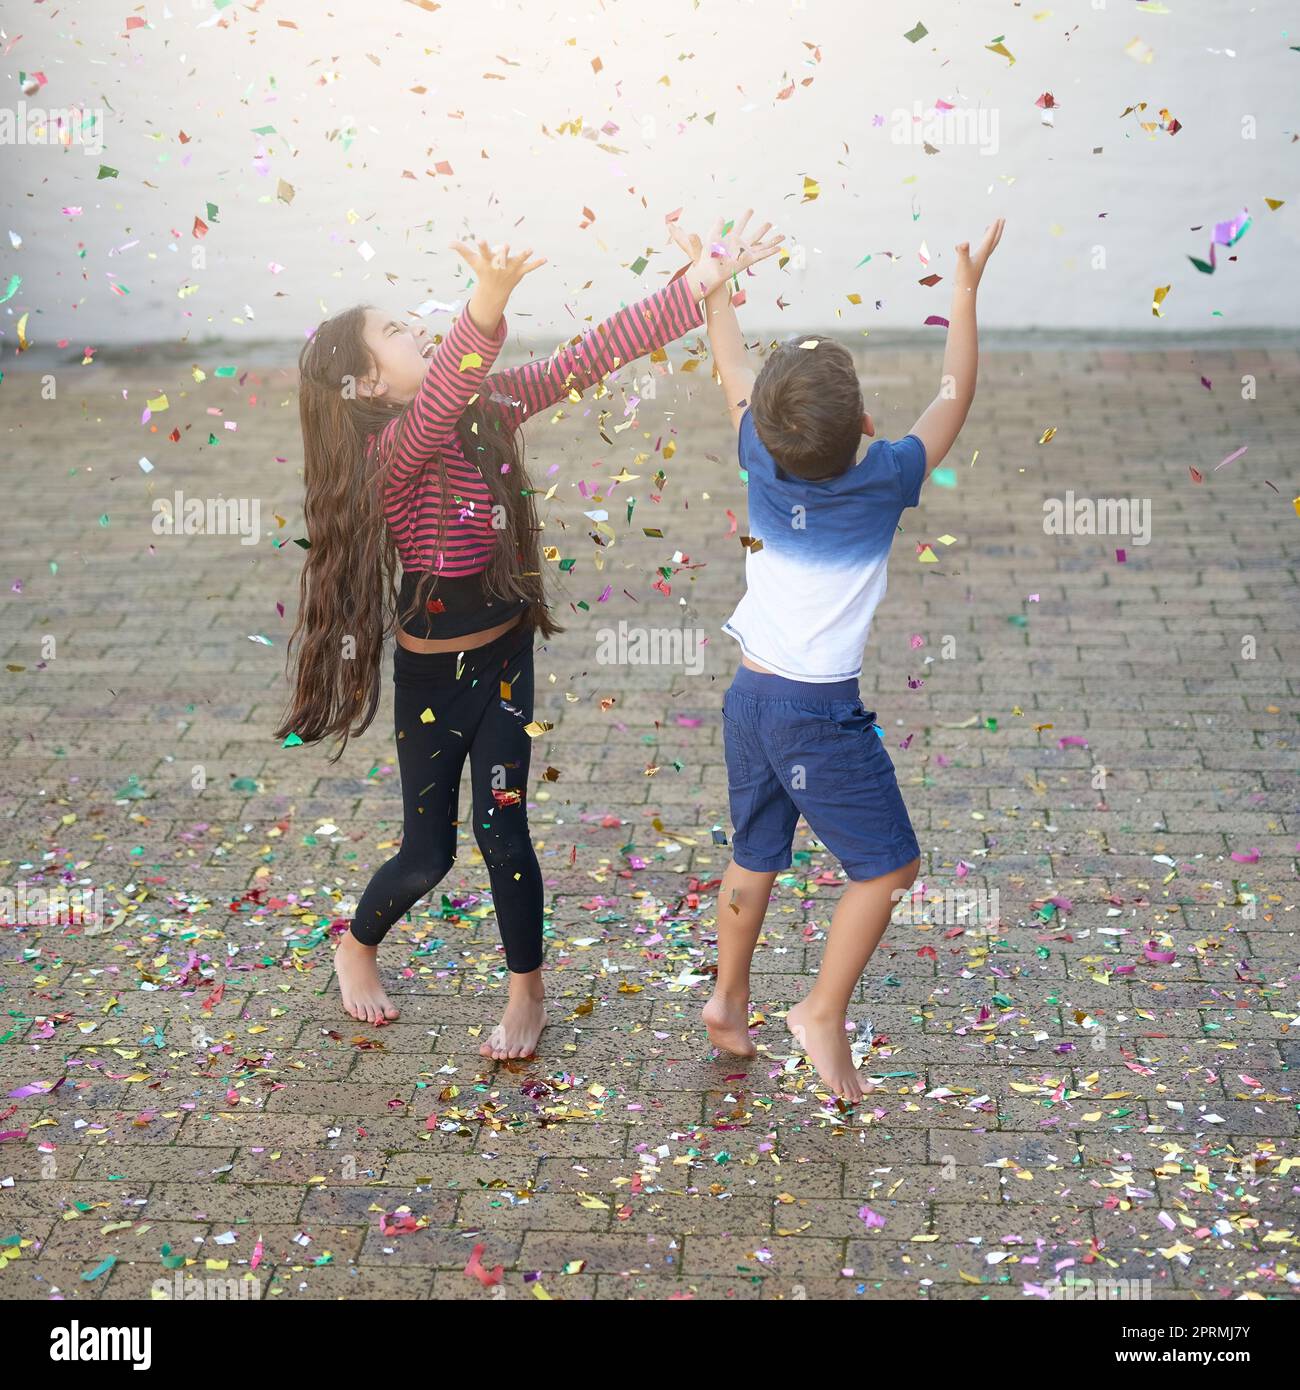 Confetti turns any situation into a celebration. a cute little boy and girl jumping to catch confetti as it falls outside their house. Stock Photo